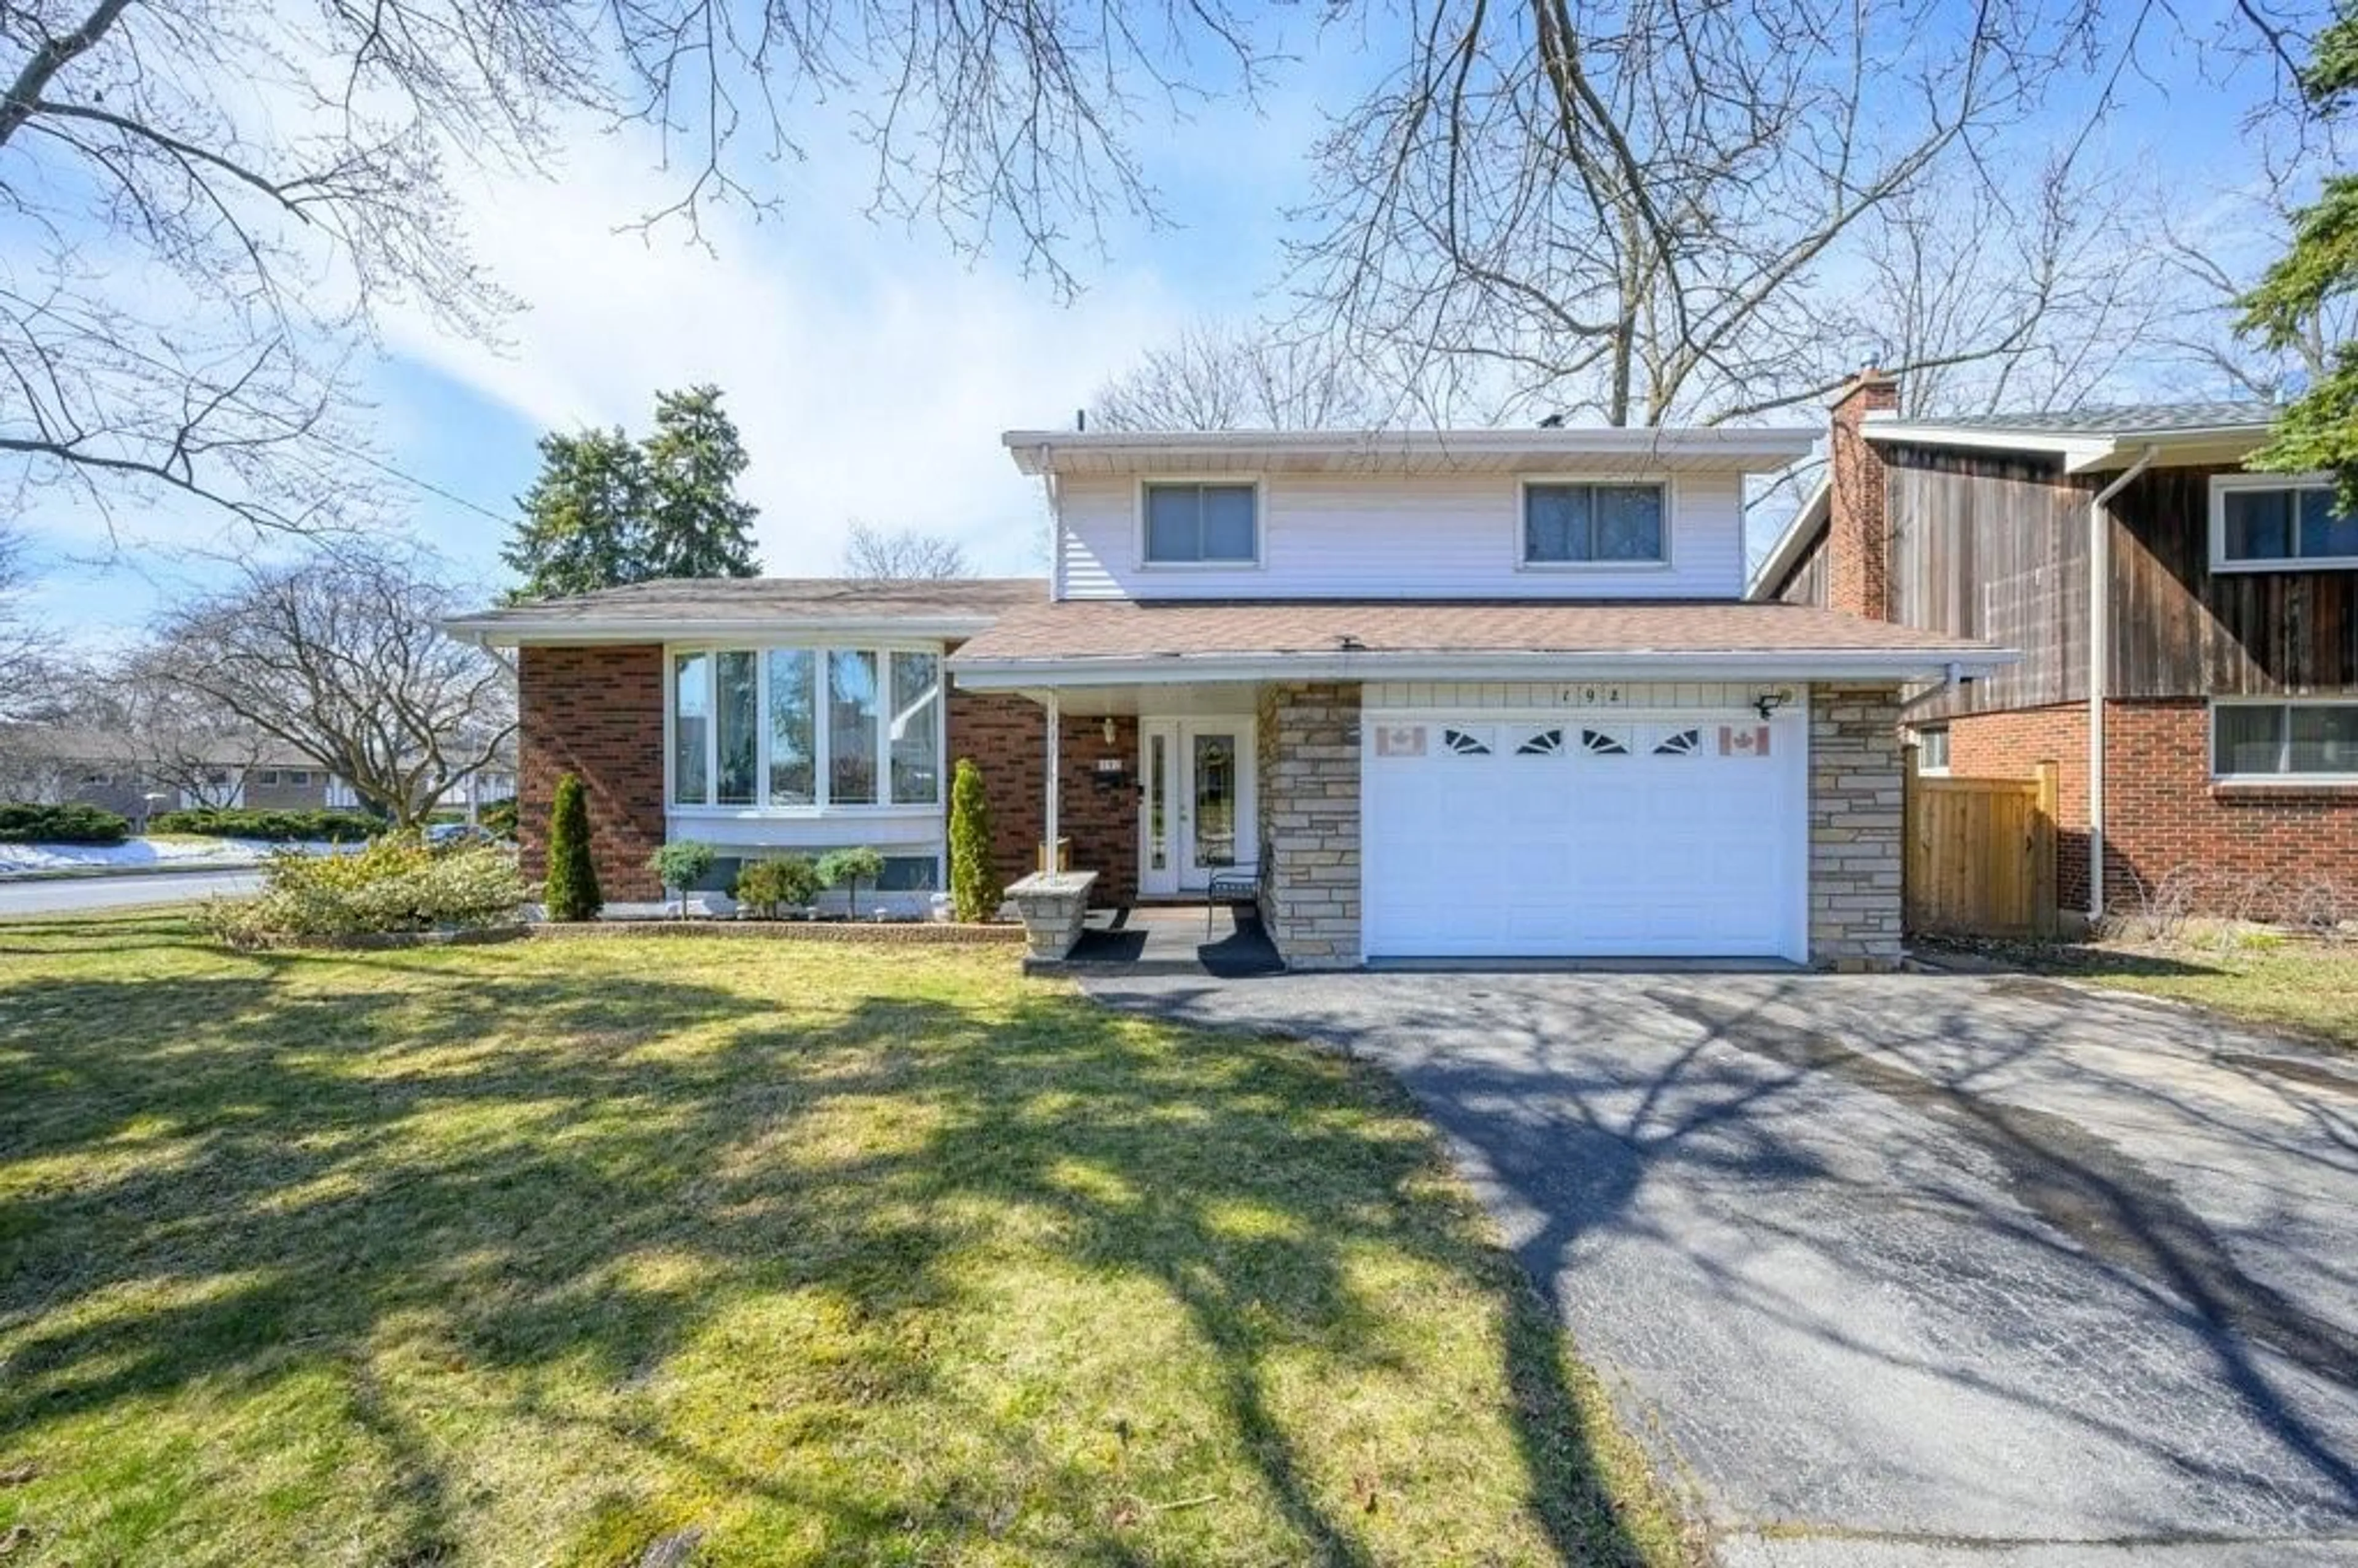 Home with brick exterior material for 192 BUCKINGHAM Dr, Hamilton Ontario L9C 2G7